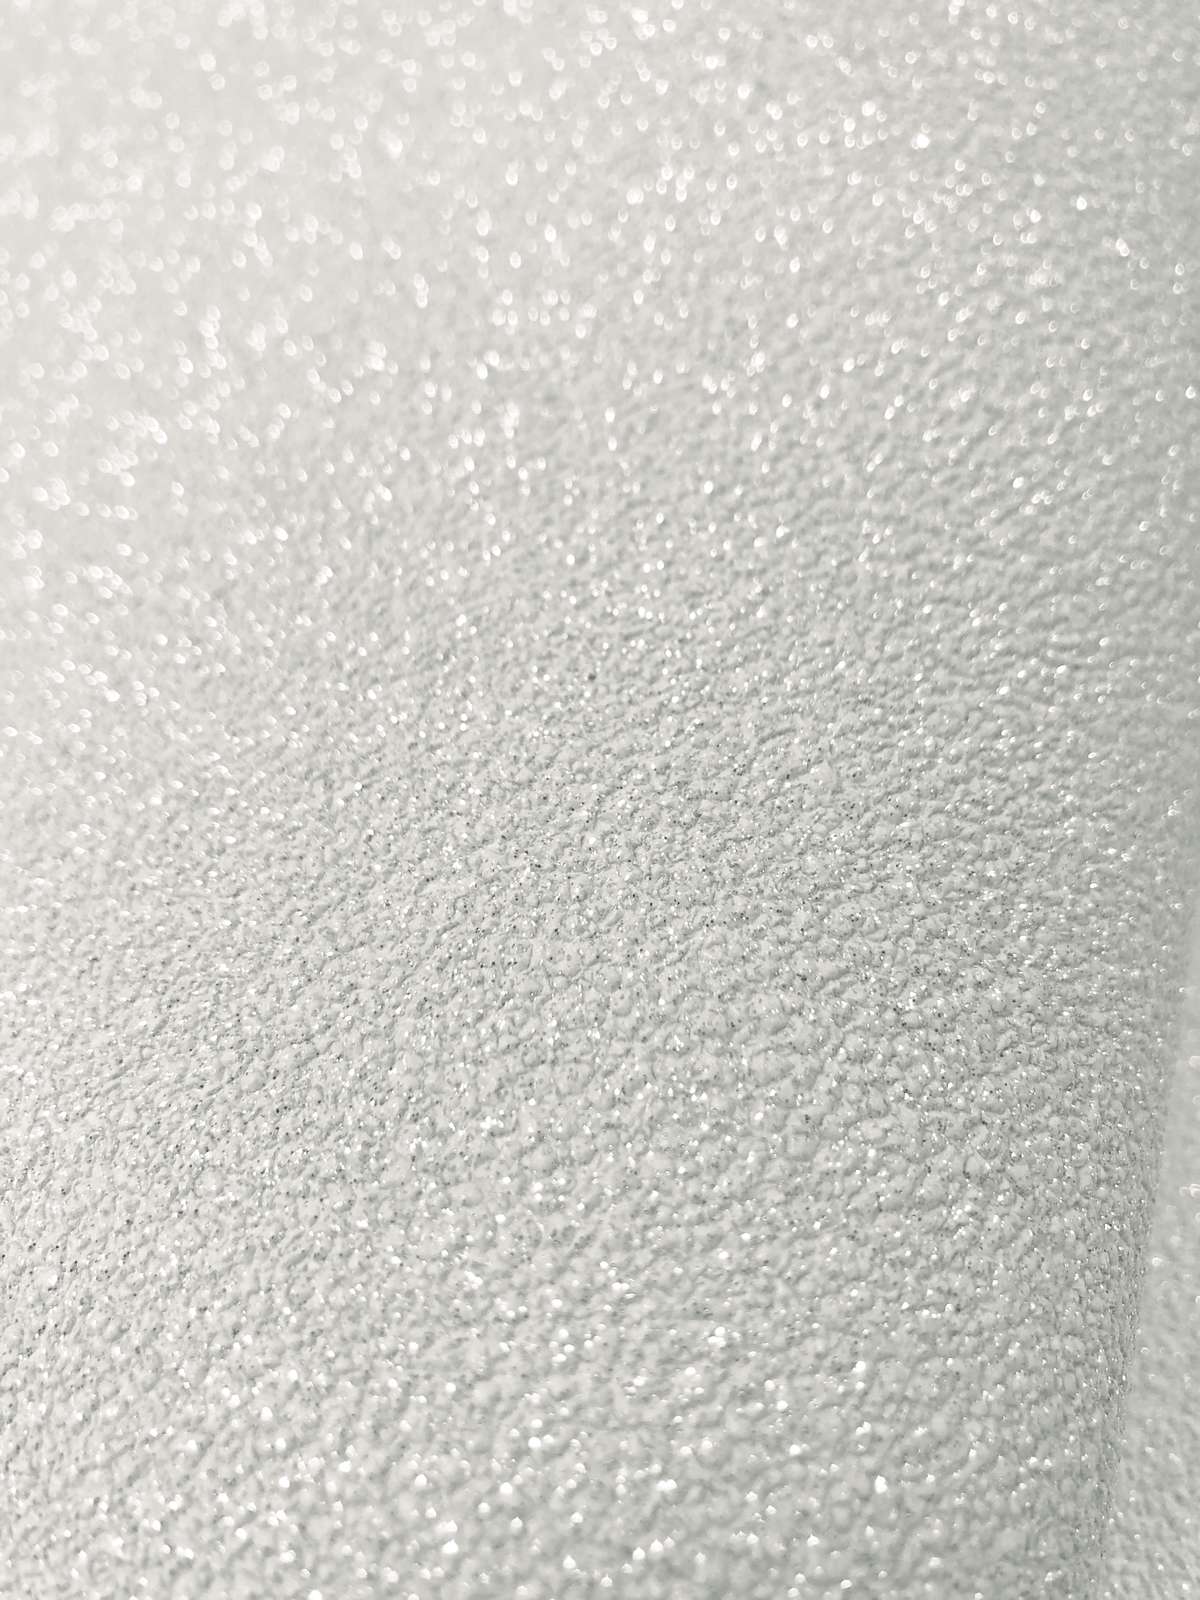             Plain wallpaper natural colour and texture pattern - grey
        